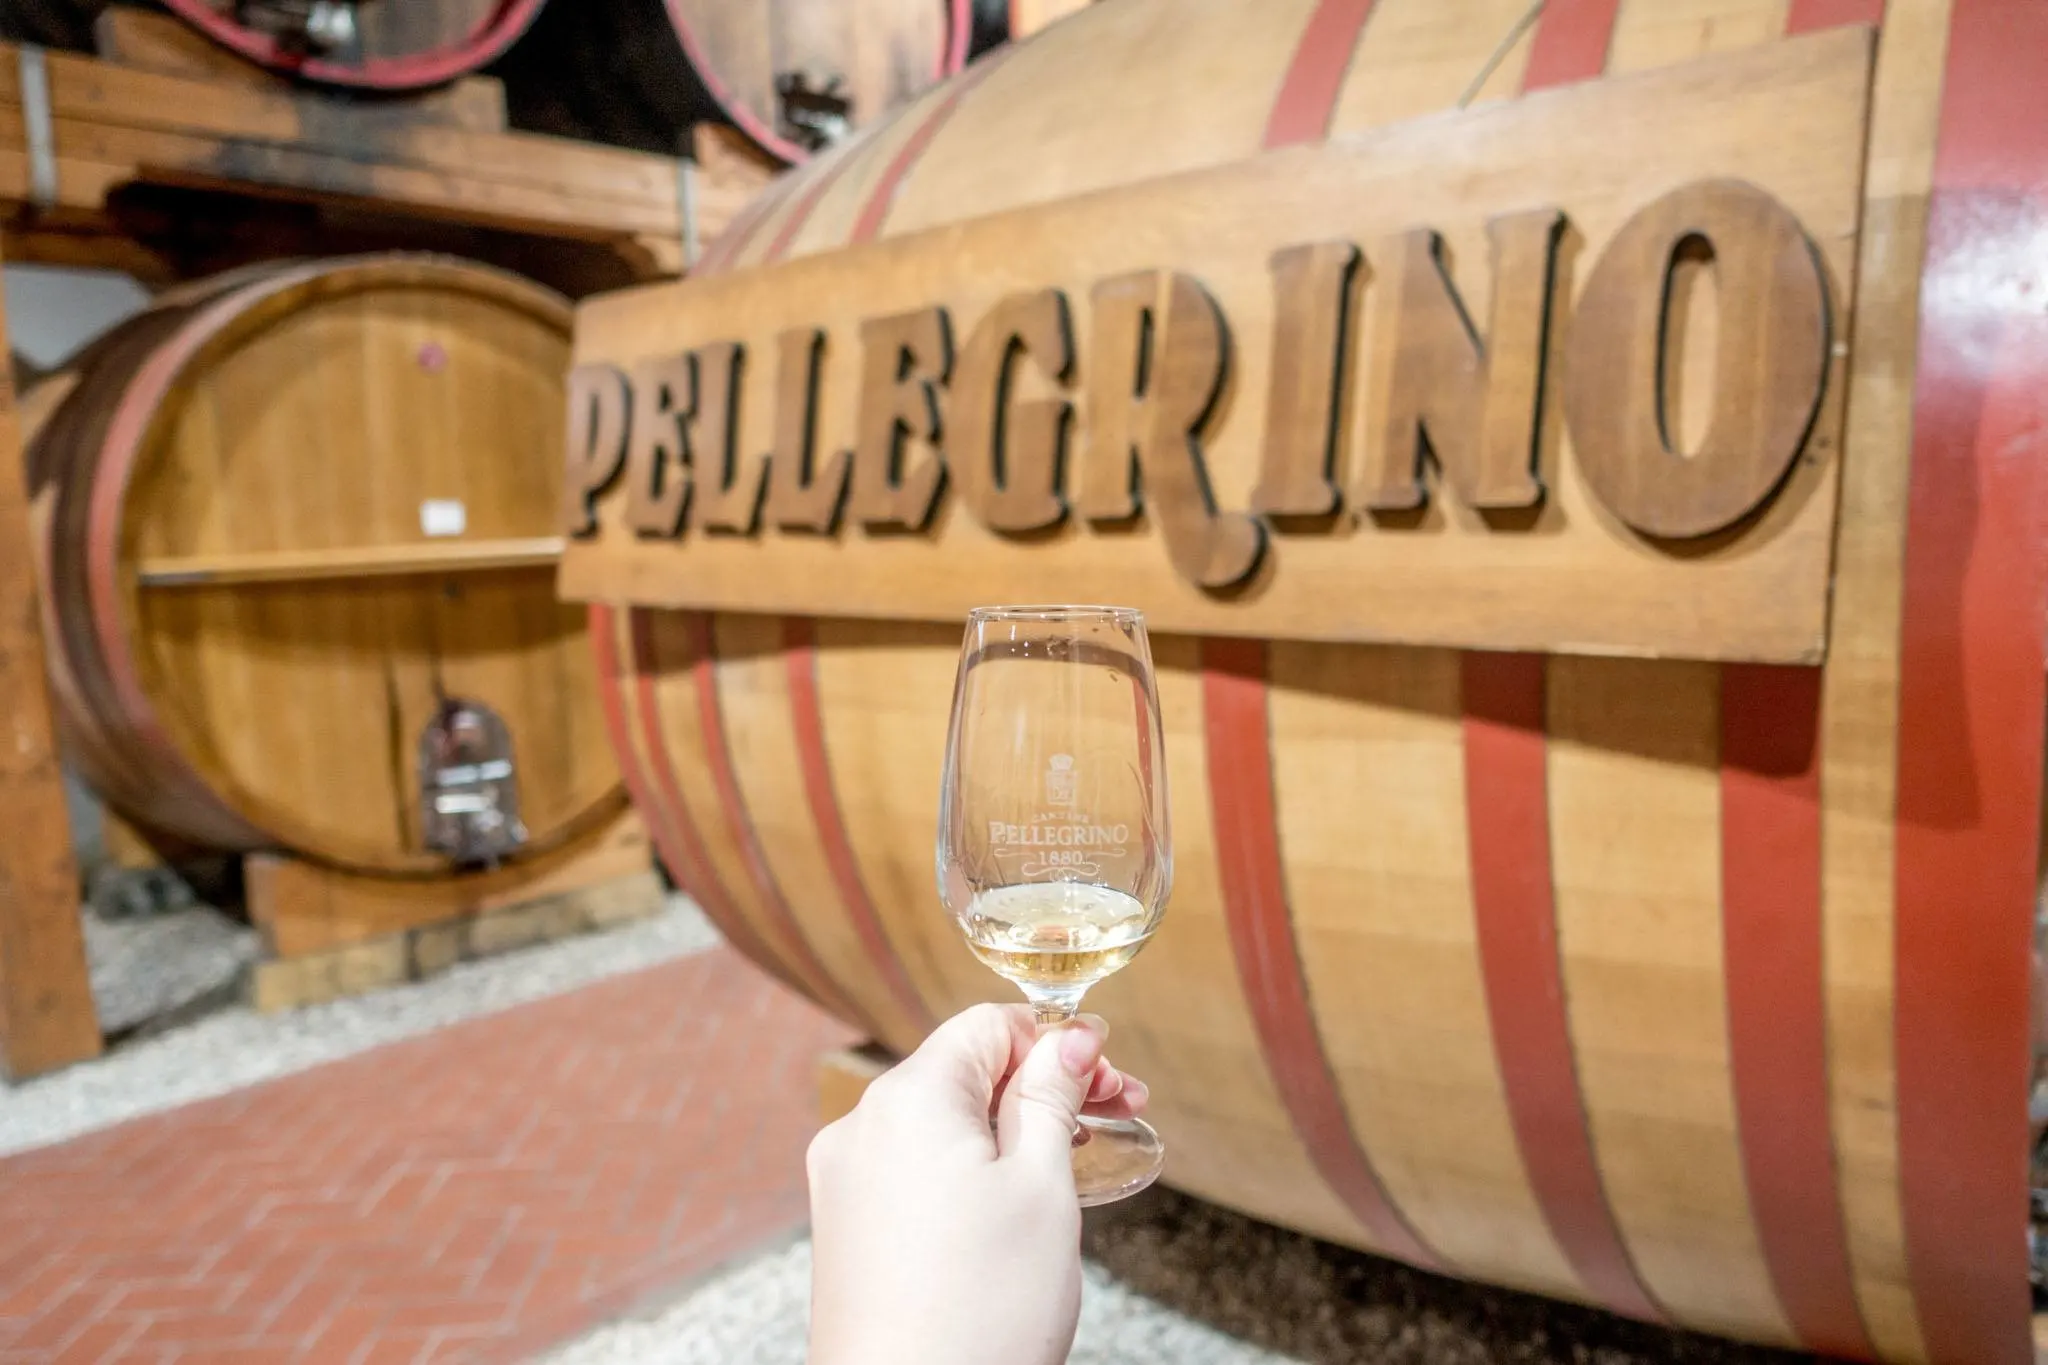 Glass of Marsala wine in front of a wine barrel labeled "Pellegrino"